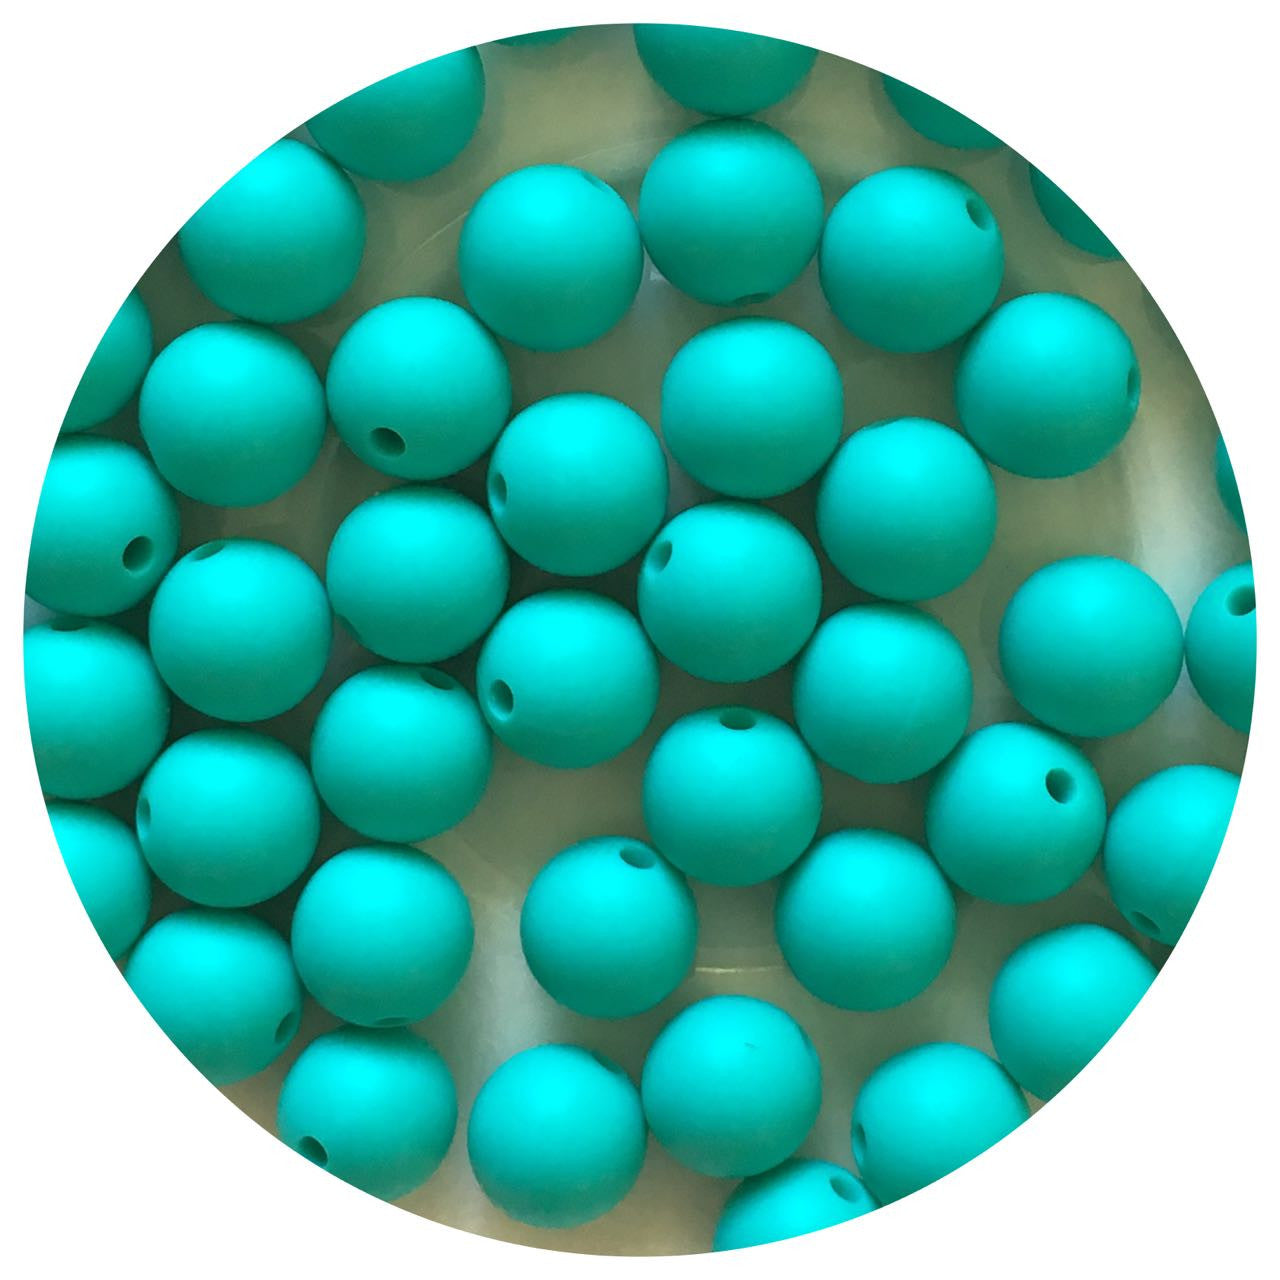 Turquoise - 12mm Round Silicone Beads - 10 beads